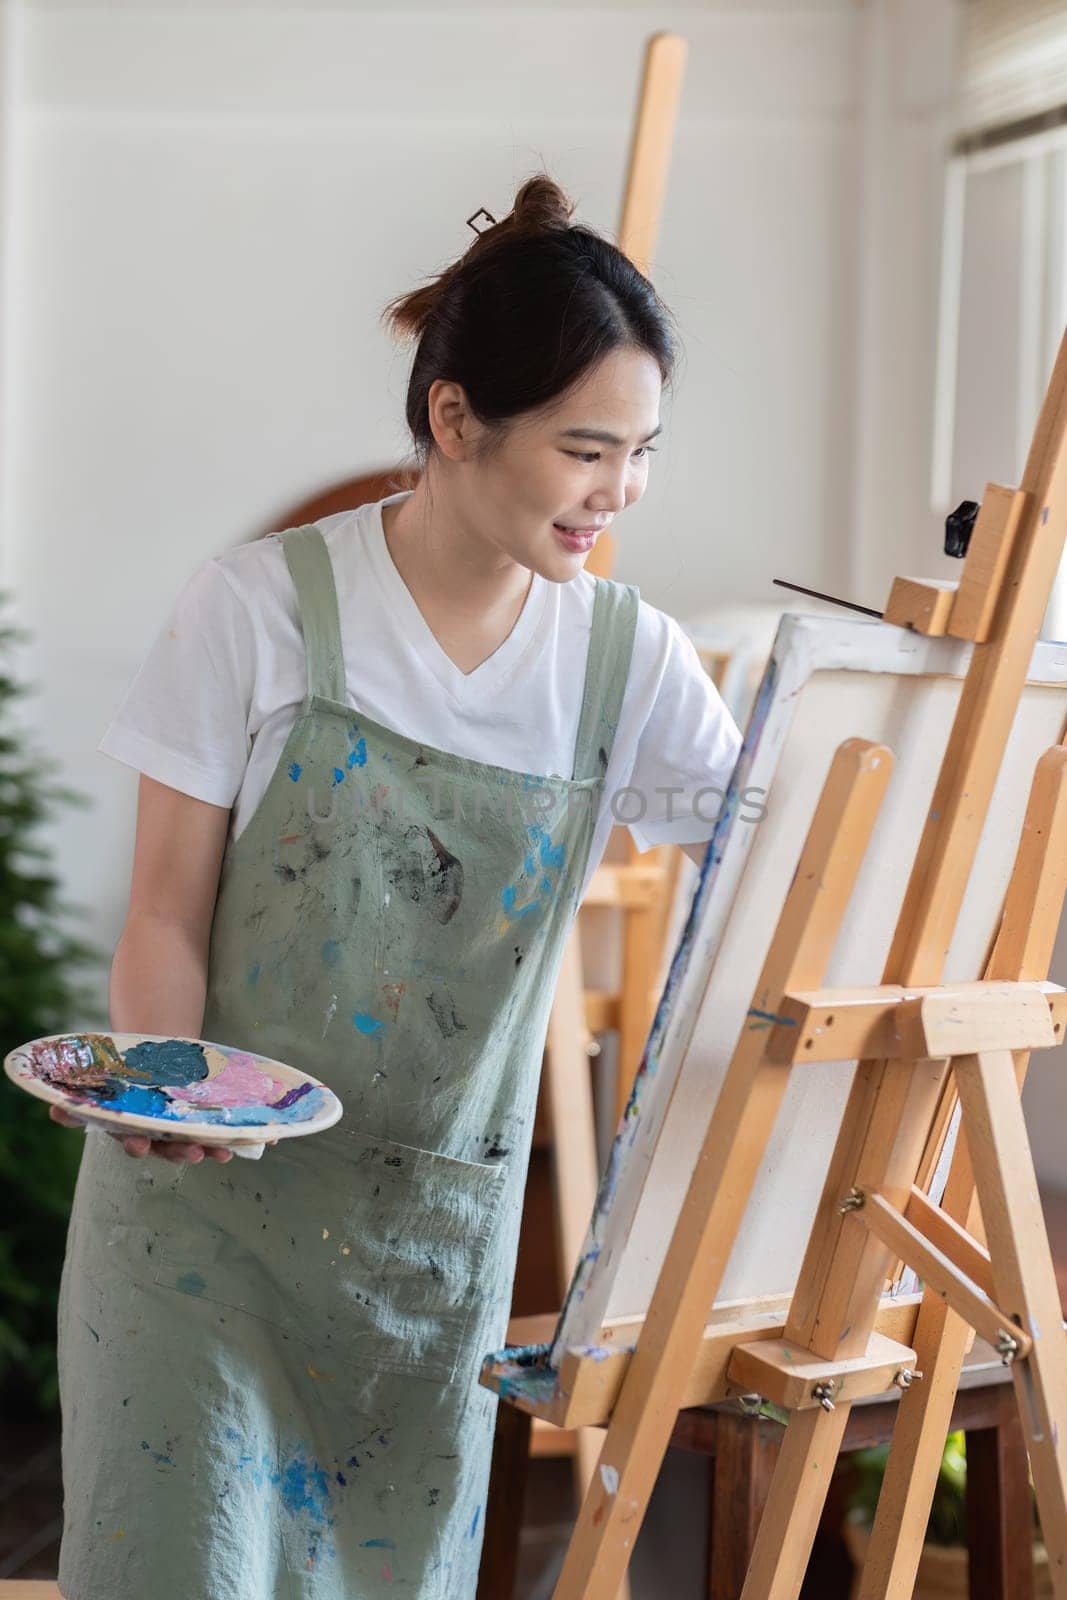 Attractive young Asian woman concentrates on painting with acrylic paints on canvas in painting studio. with a cheerful smile.